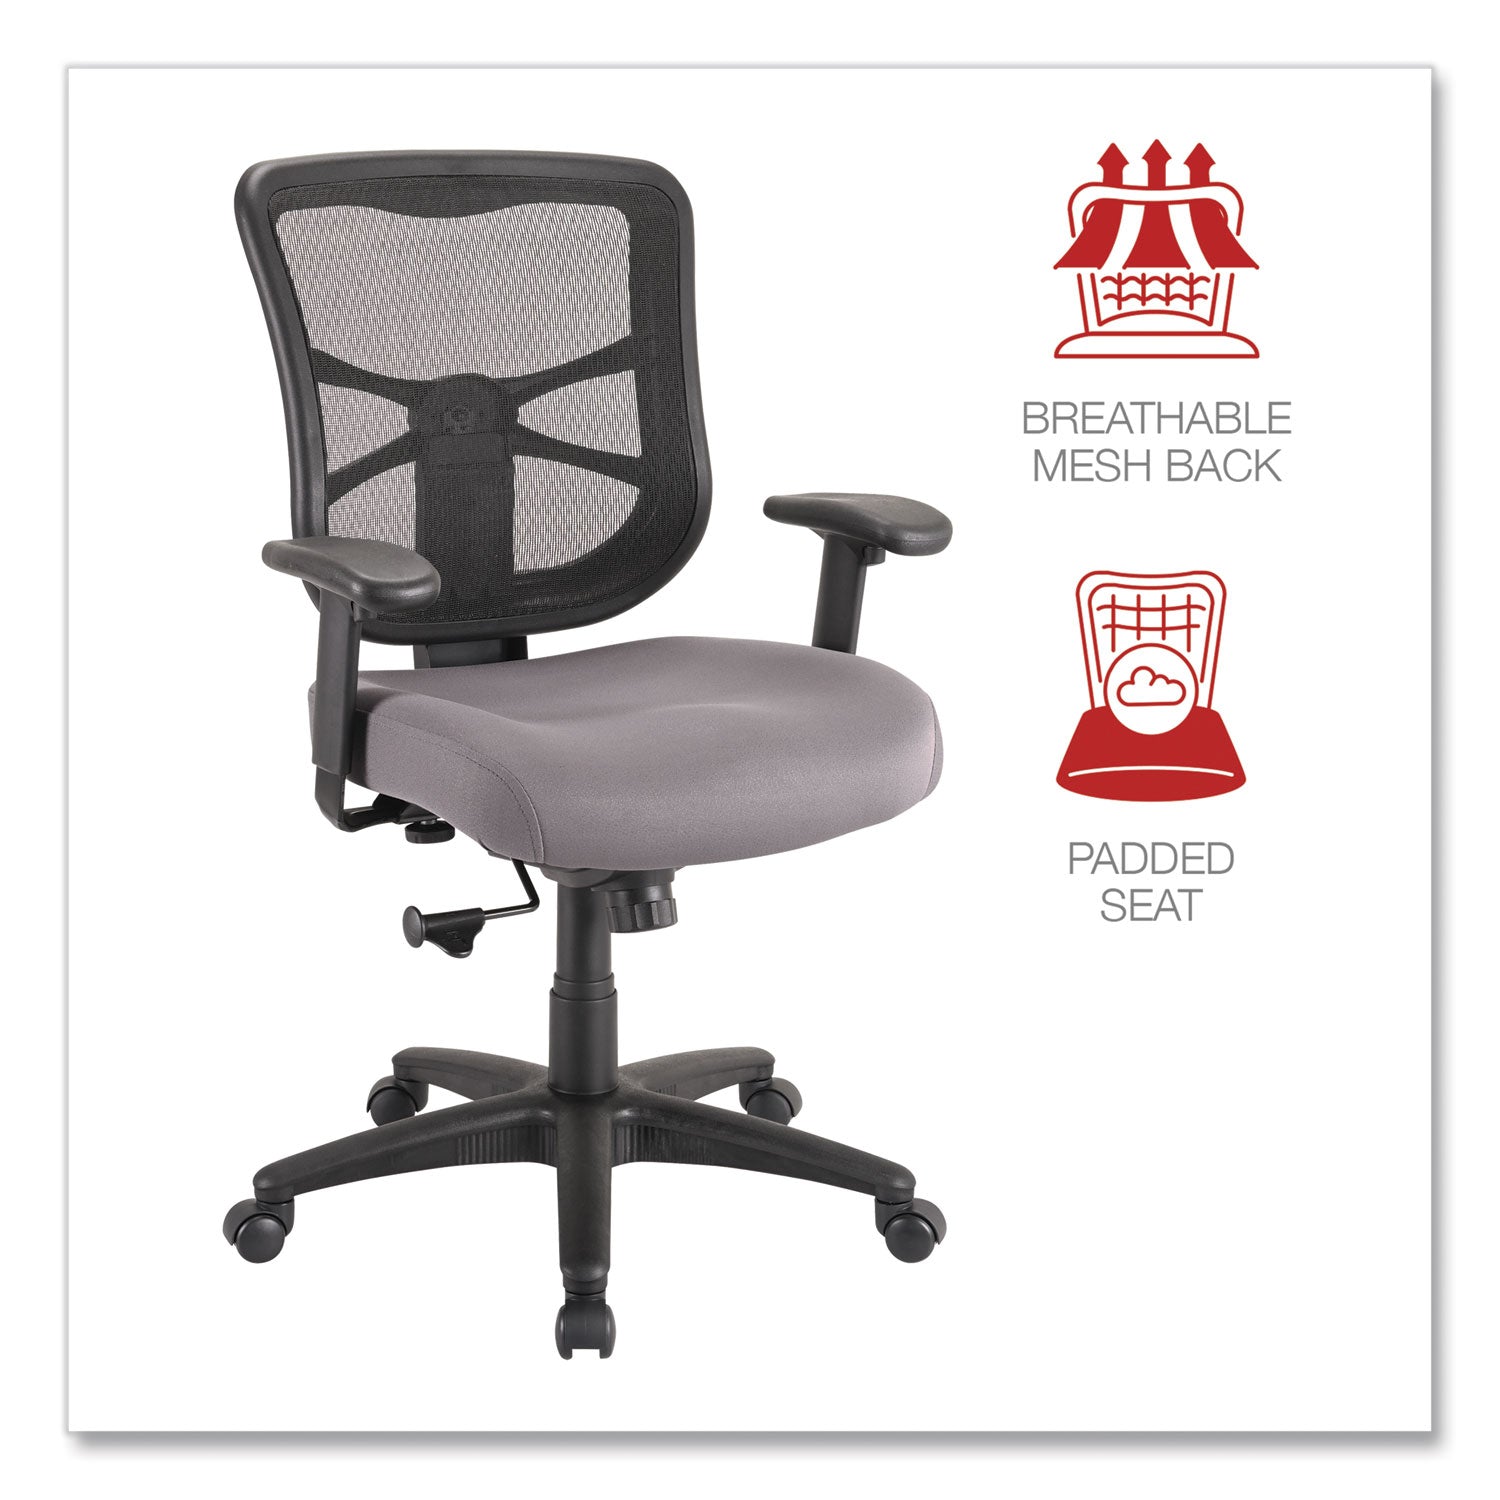 alera-elusion-series-mesh-mid-back-swivel-tilt-chair-supports-up-to-275-lb-179-to-218-seat-height-gray-seat_aleel42bme40b - 7